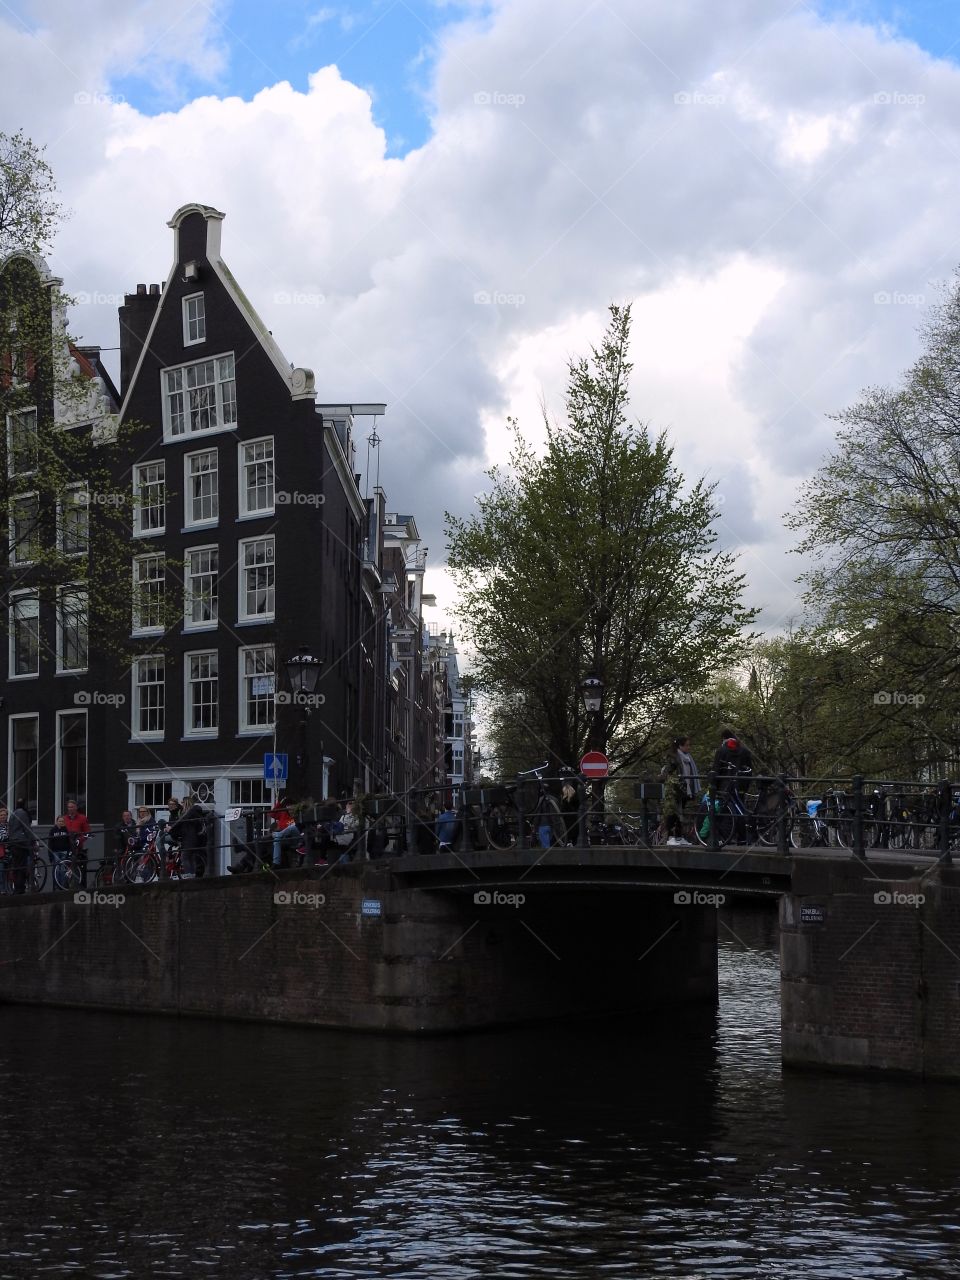 The canals of Amsterdam 